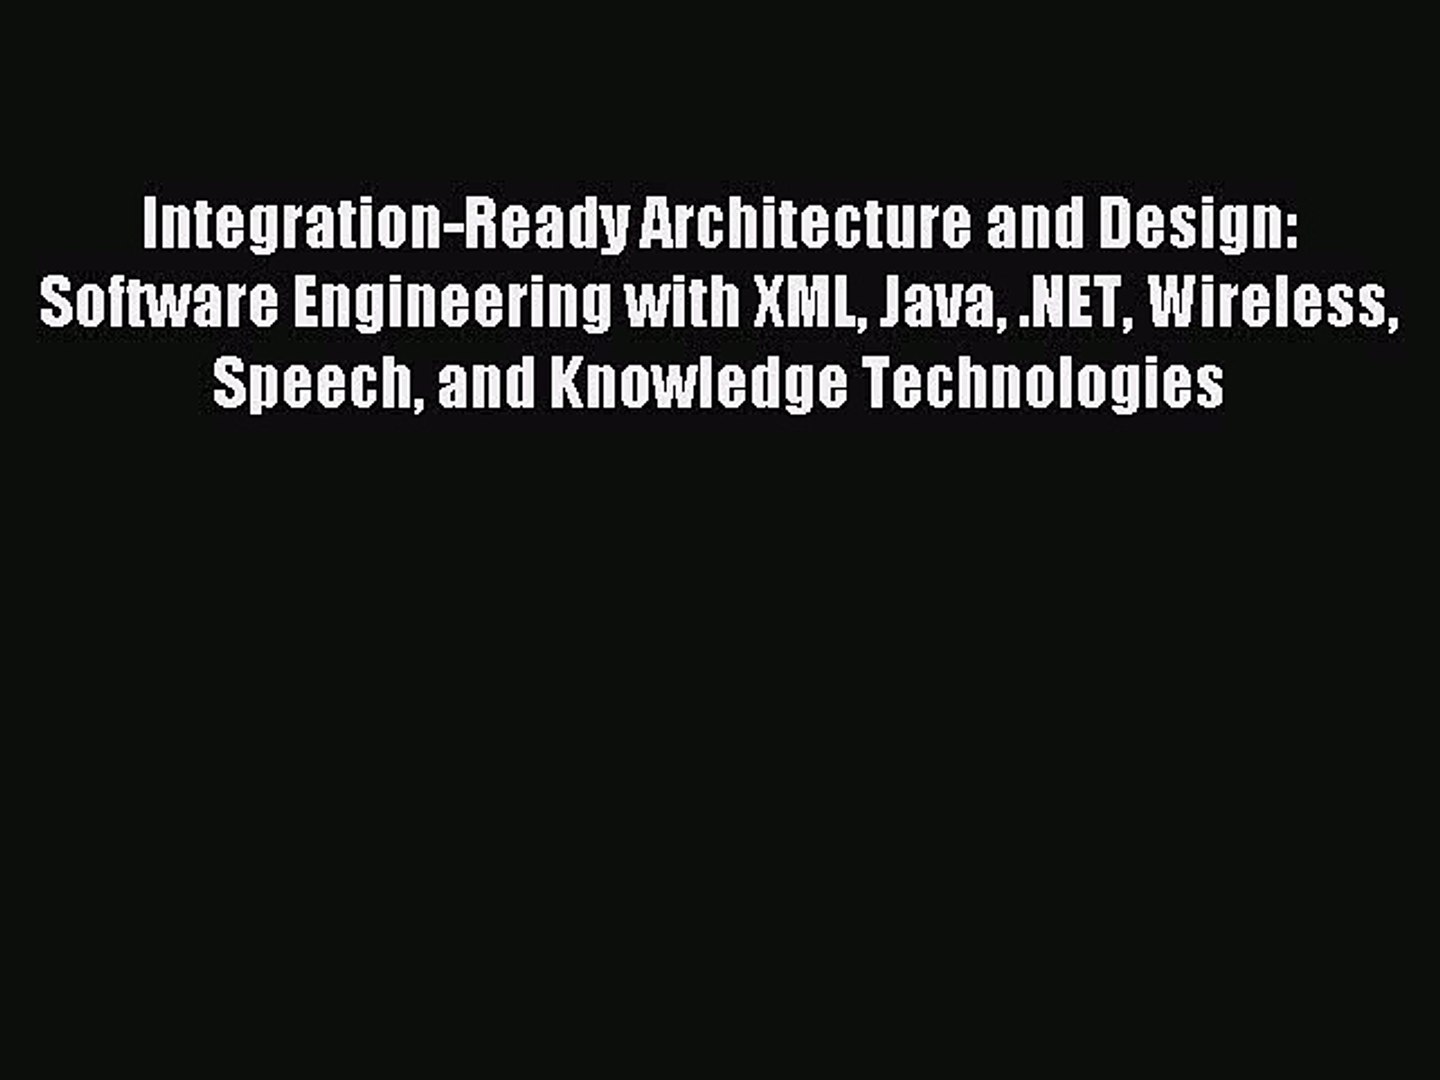 [Read PDF] Integration-Ready Architecture and Design: Software Engineering with XML Java .NET